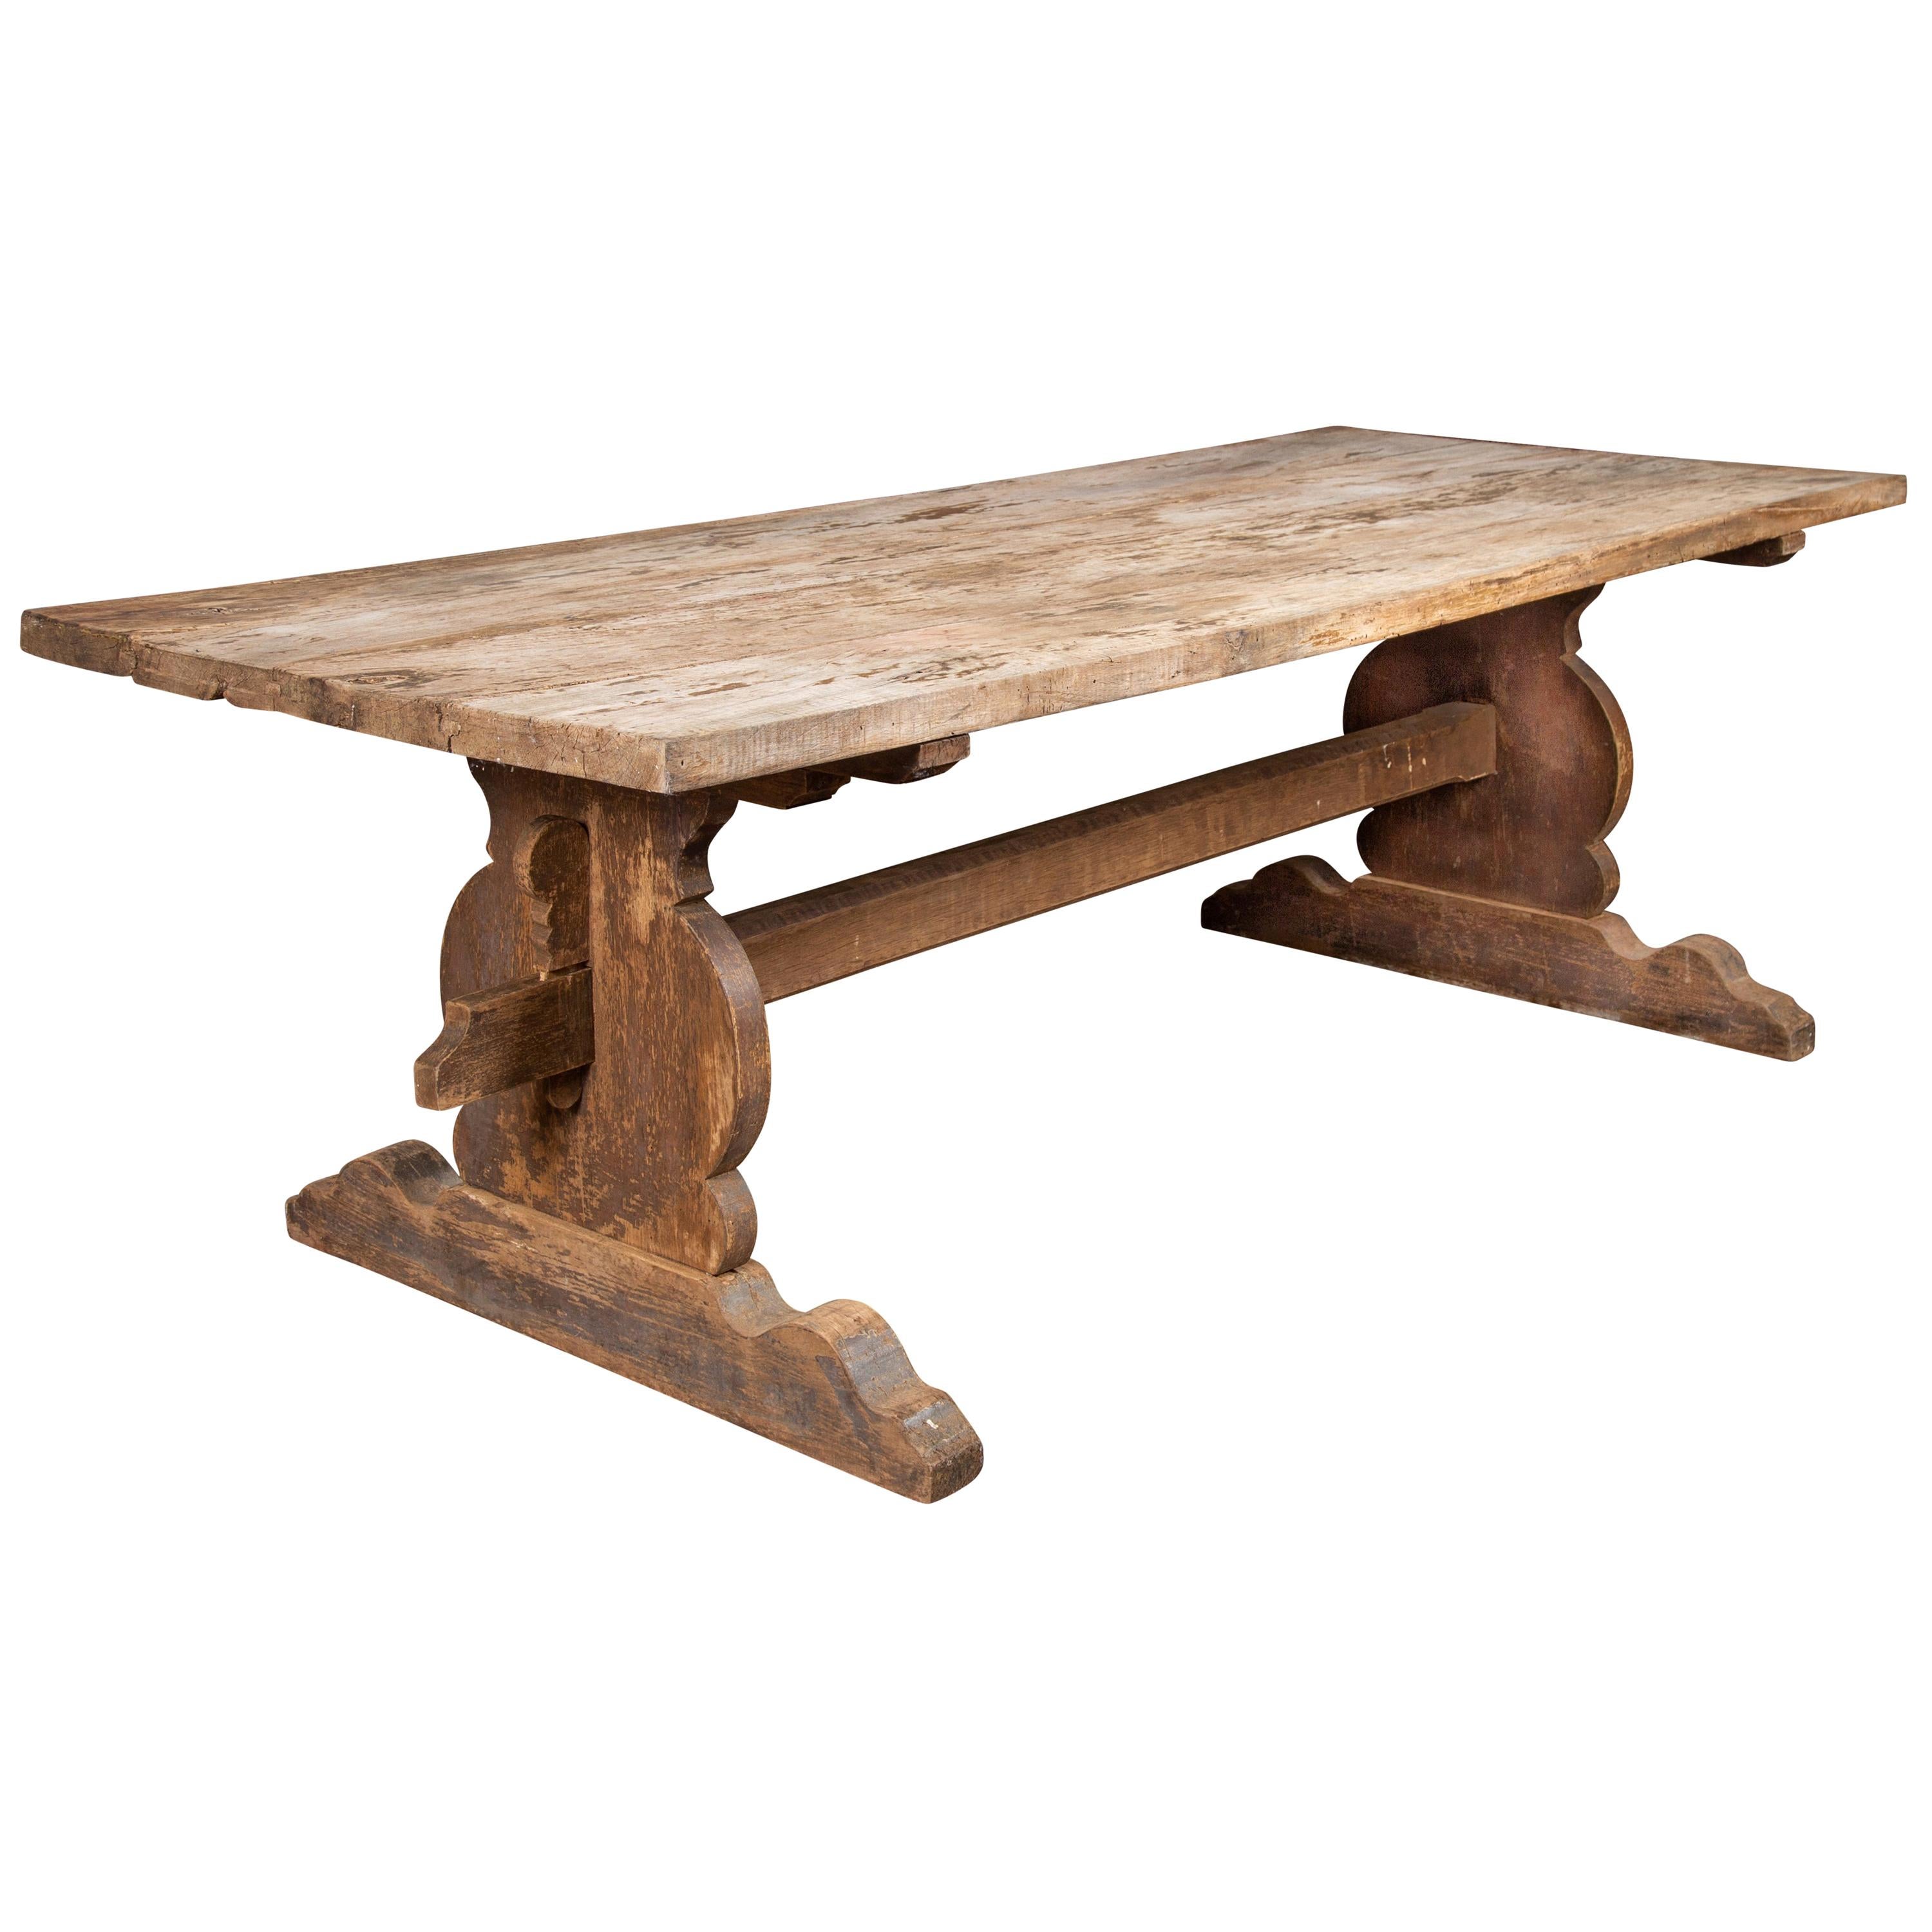 English 1880s Oak Farm Dining Table with Carved Trestle Base and Aged Patina